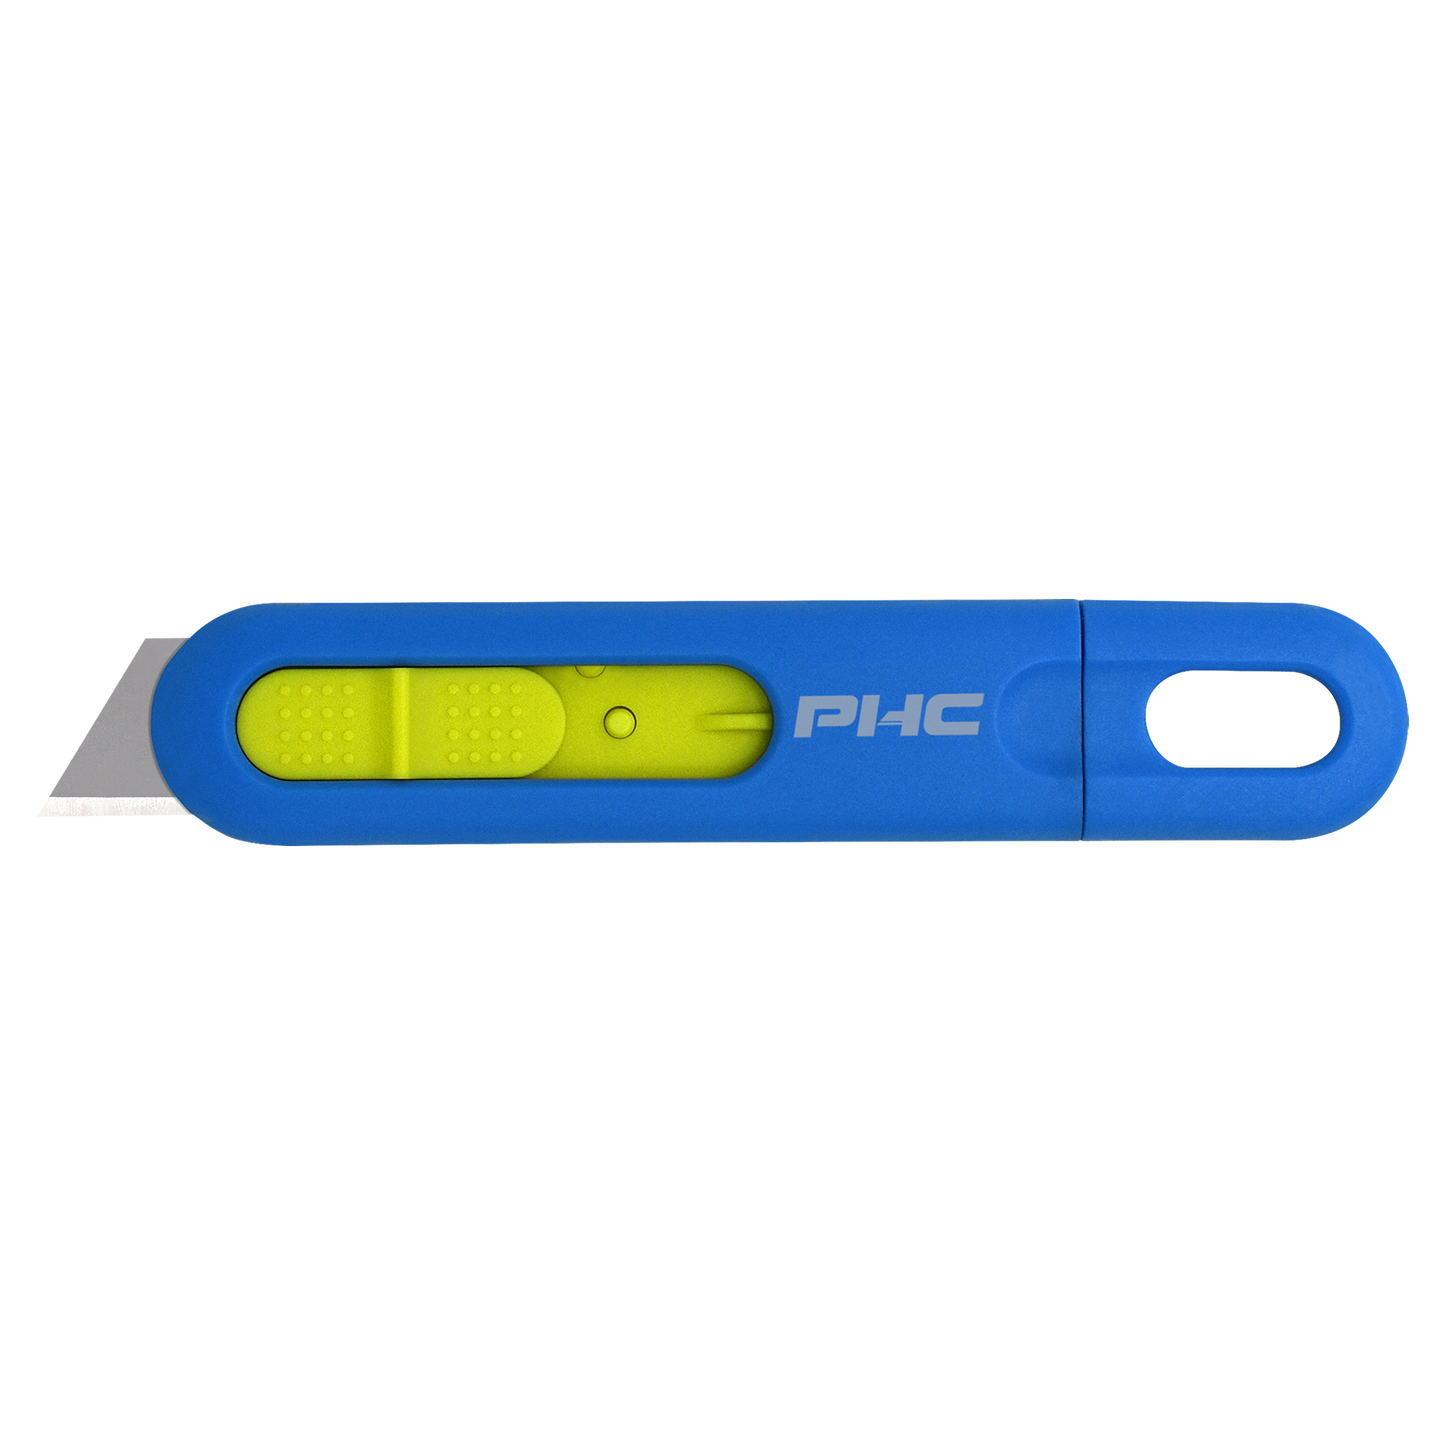 VOLO disposable auto-retract safety knife - DaltonSafety